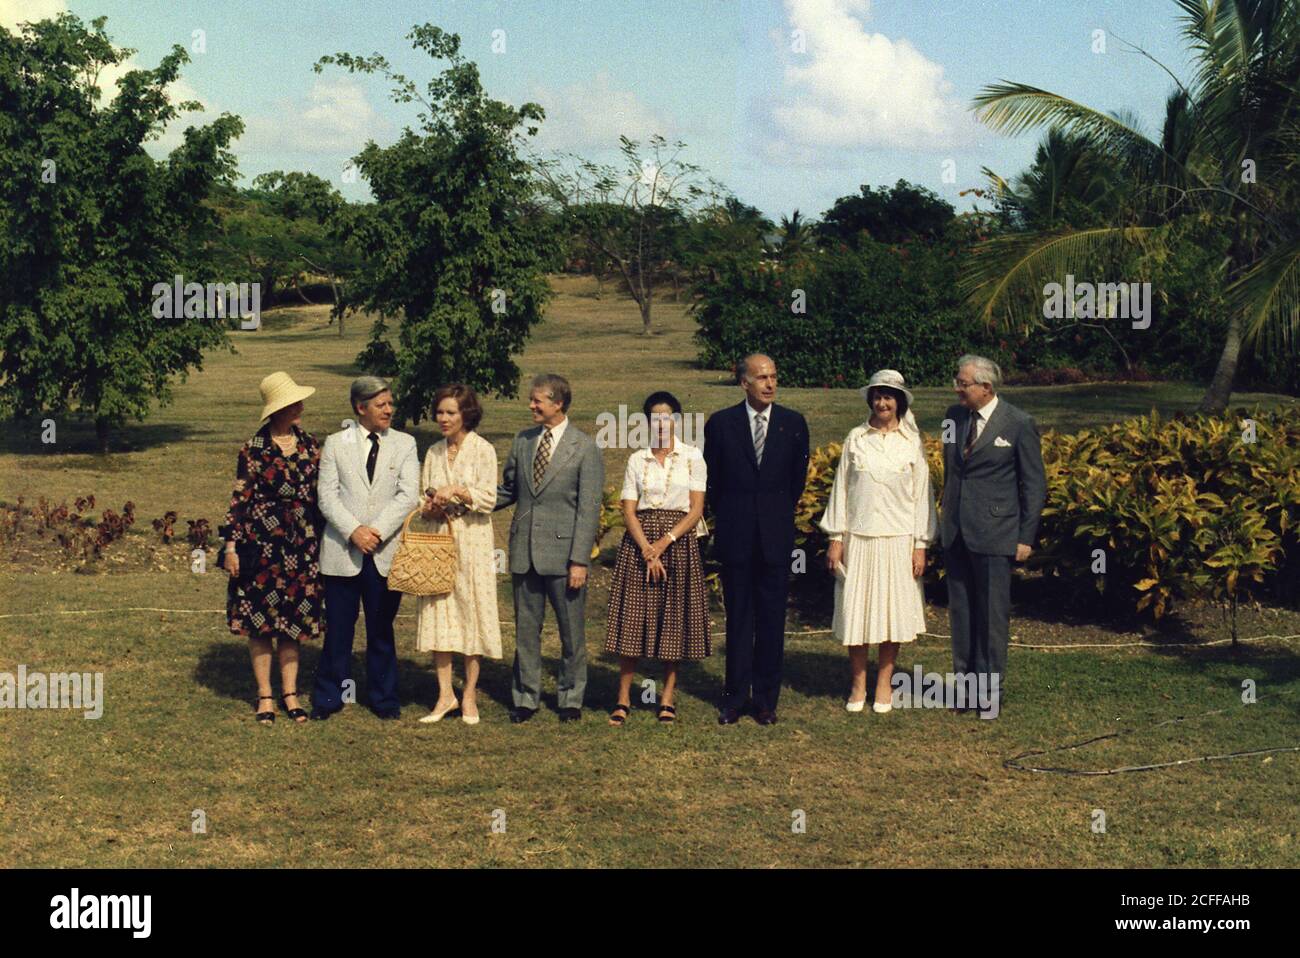 'Jimmy Carter and leaders of Western Europe, Helmut Schmidt, Giscard d'Estaing and James Callaghan pose with their wives while meeting in Guadeloupe. ca.  01/05/1979' Stock Photo